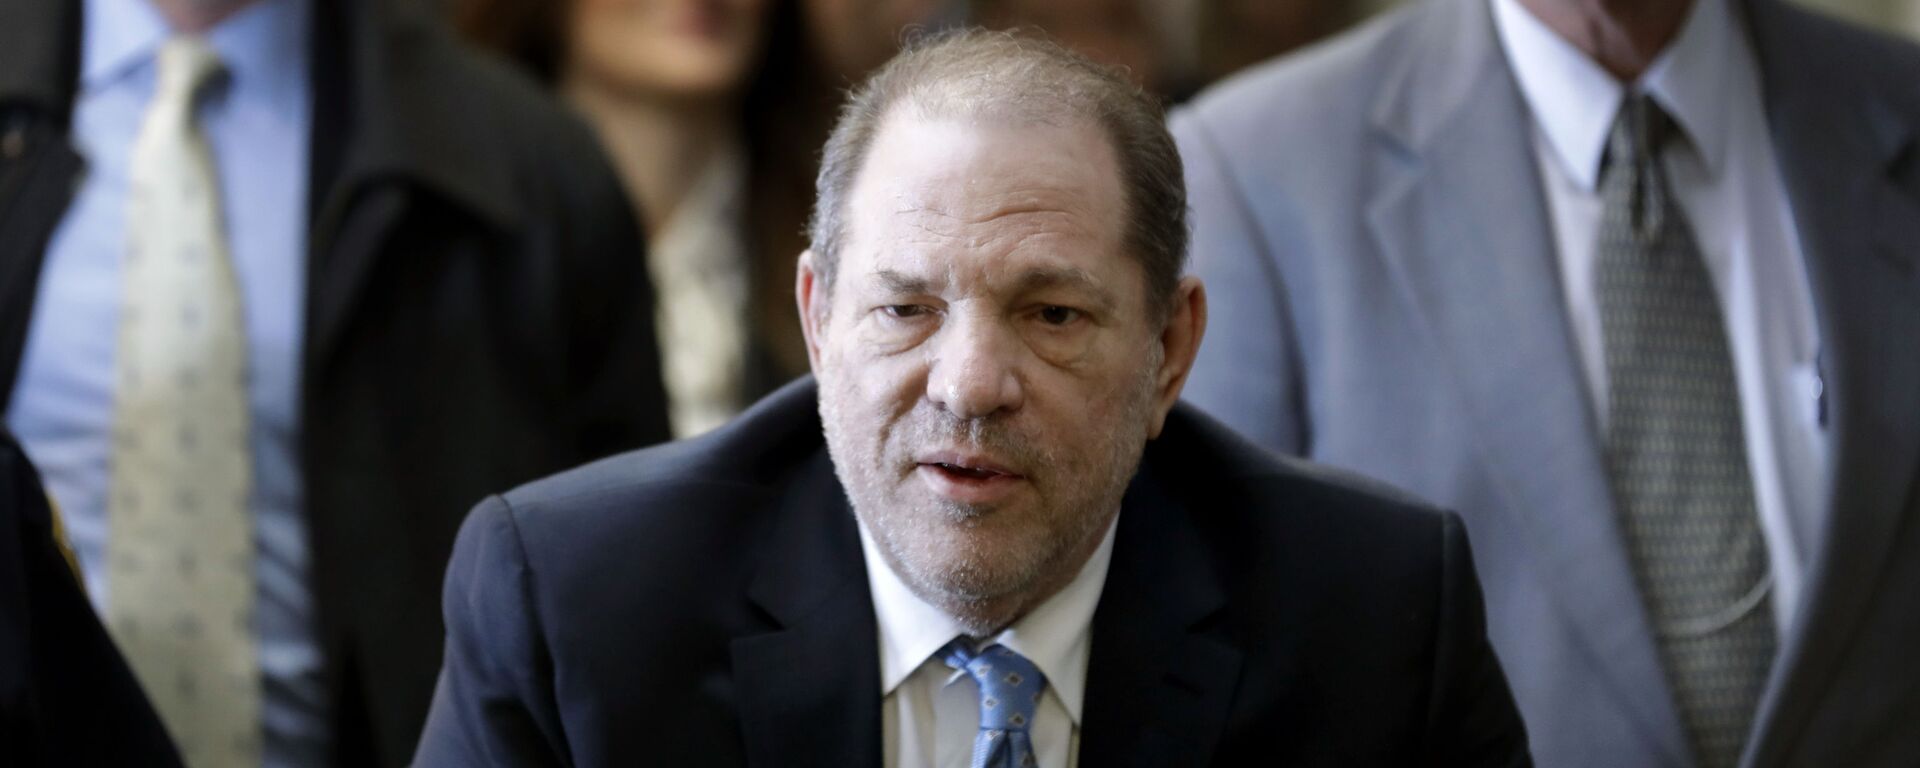 In this Feb. 24, 2020, file photo, Harvey Weinstein arrives at a Manhattan courthouse as jury deliberations continue in his rape trial in New York. The disgraced Hollywood film mogul and convicted rapist is asking a bankruptcy judge in Delaware to allow him to pursue arbitration in New York over what he claims is his wrongful termination from the company he co-founded. - Sputnik International, 1920, 15.09.2022